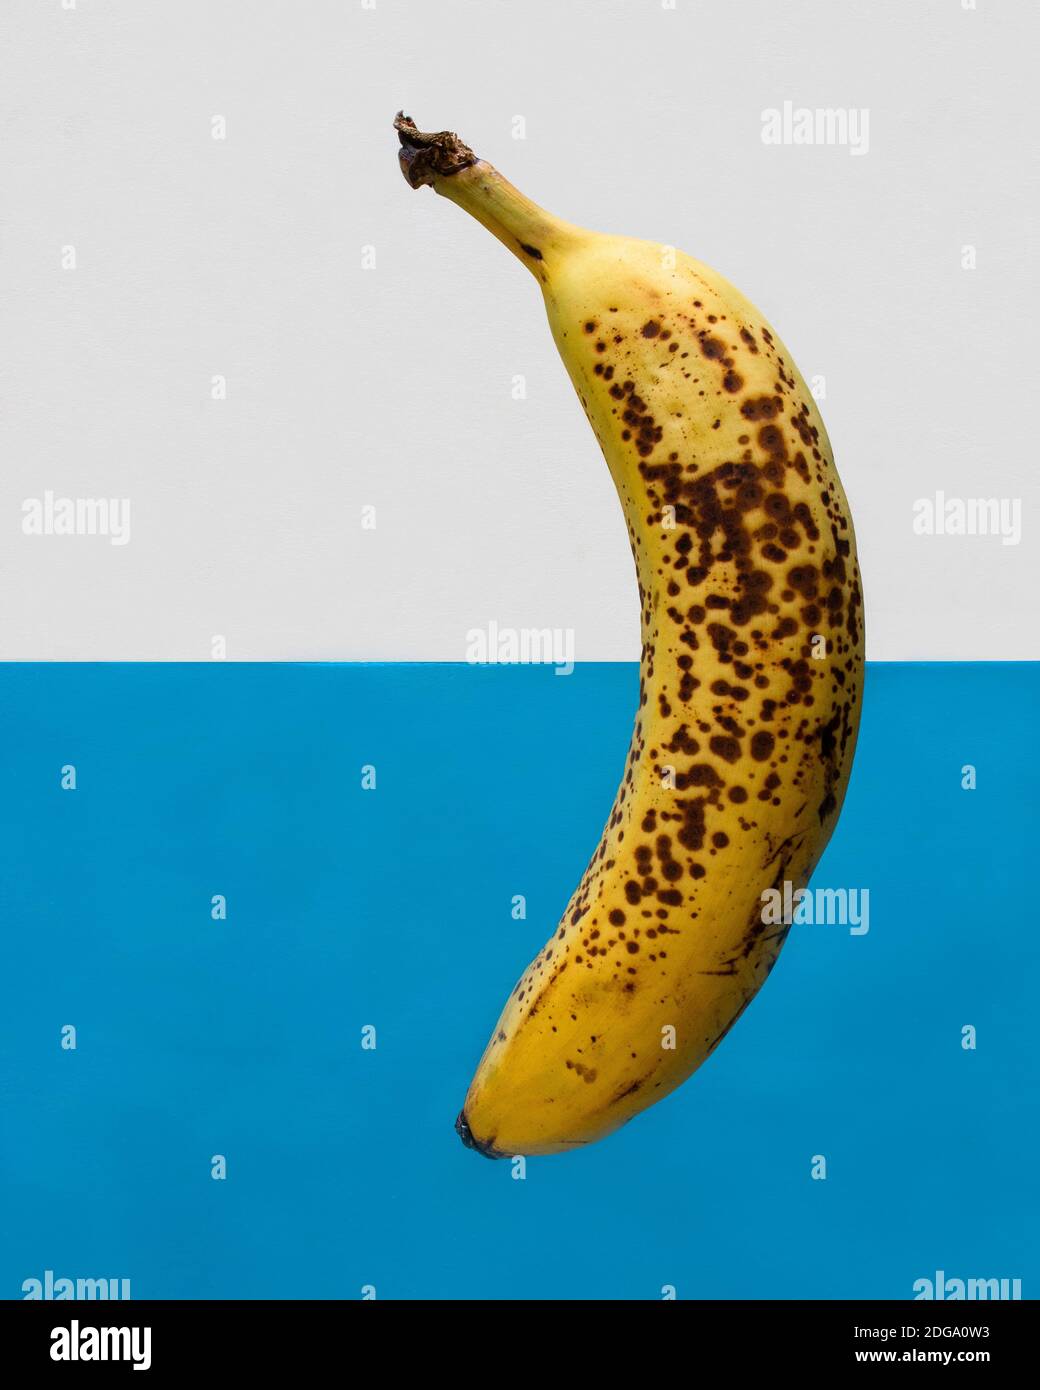 Single ripe banana with peel isolated on half blue and half white background. Pop art style Stock Photo